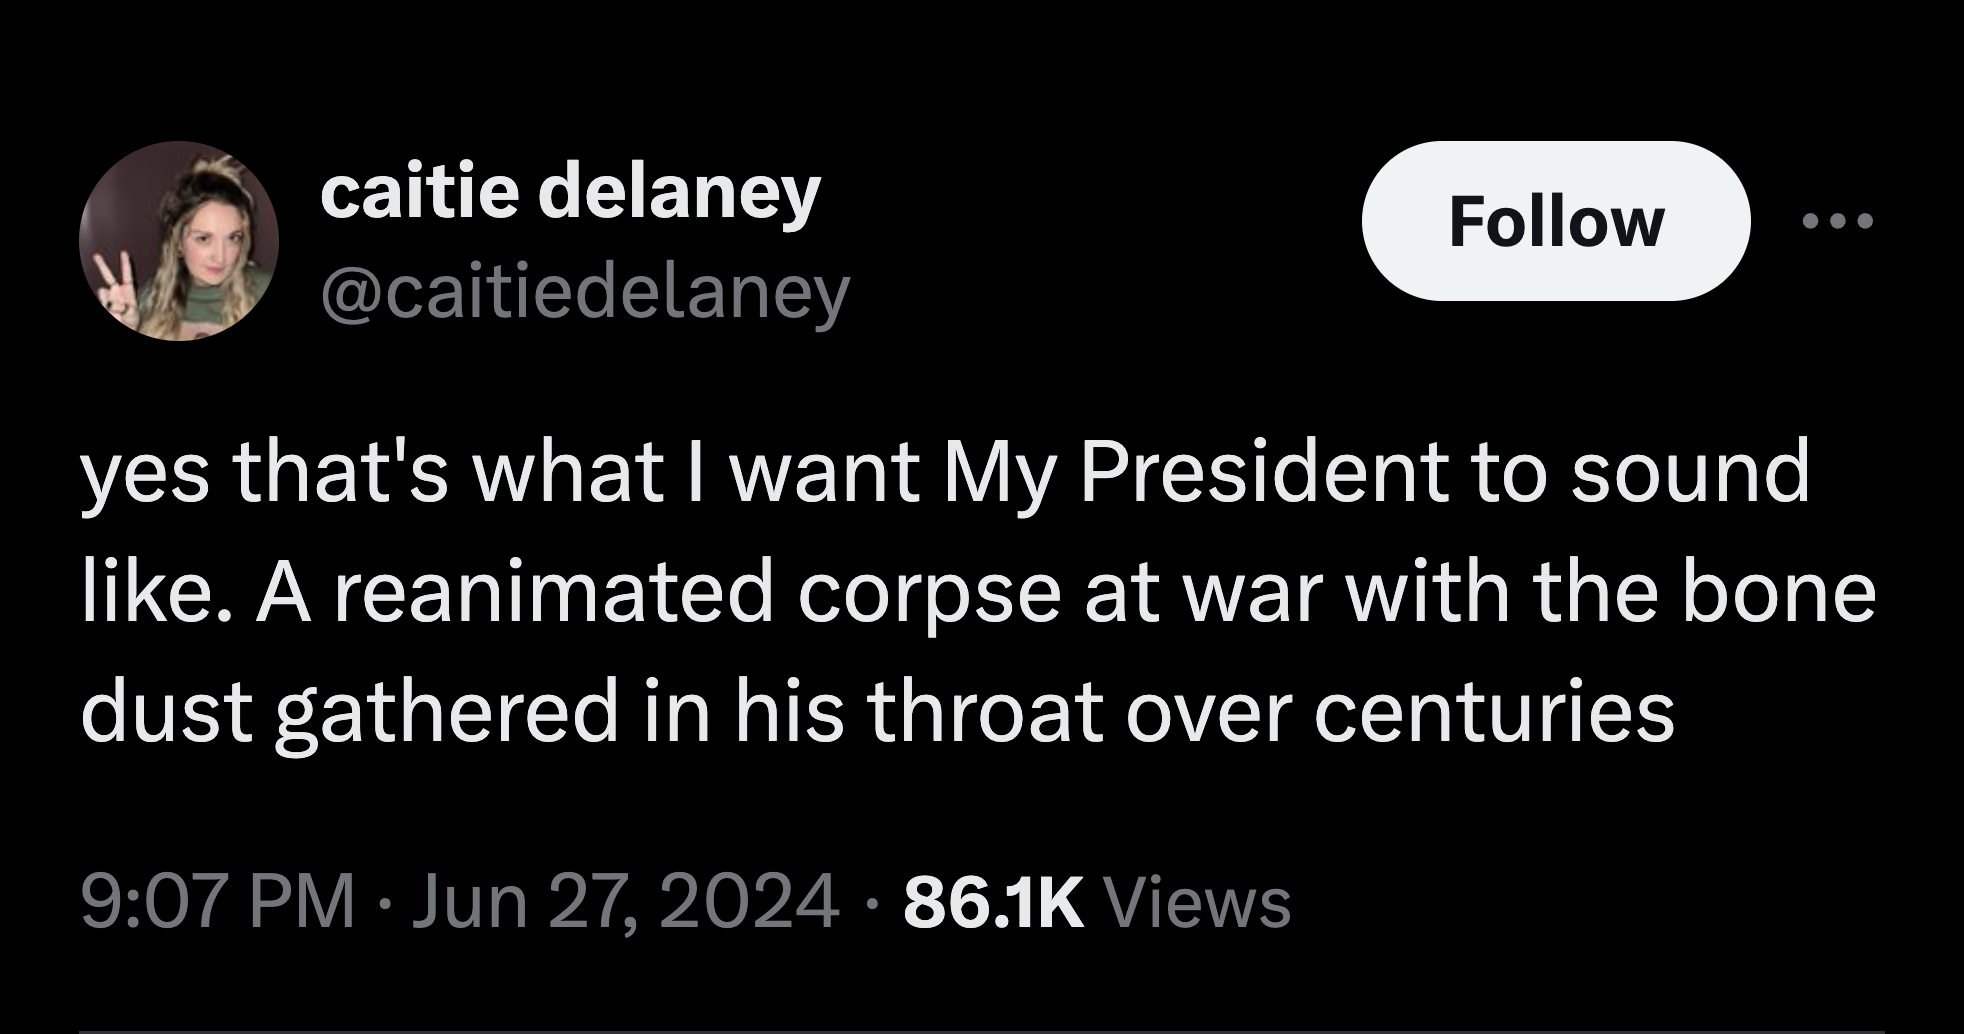 parallel - caitie delaney yes that's what I want My President to sound . A reanimated corpse at war with the bone dust gathered in his throat over centuries Views